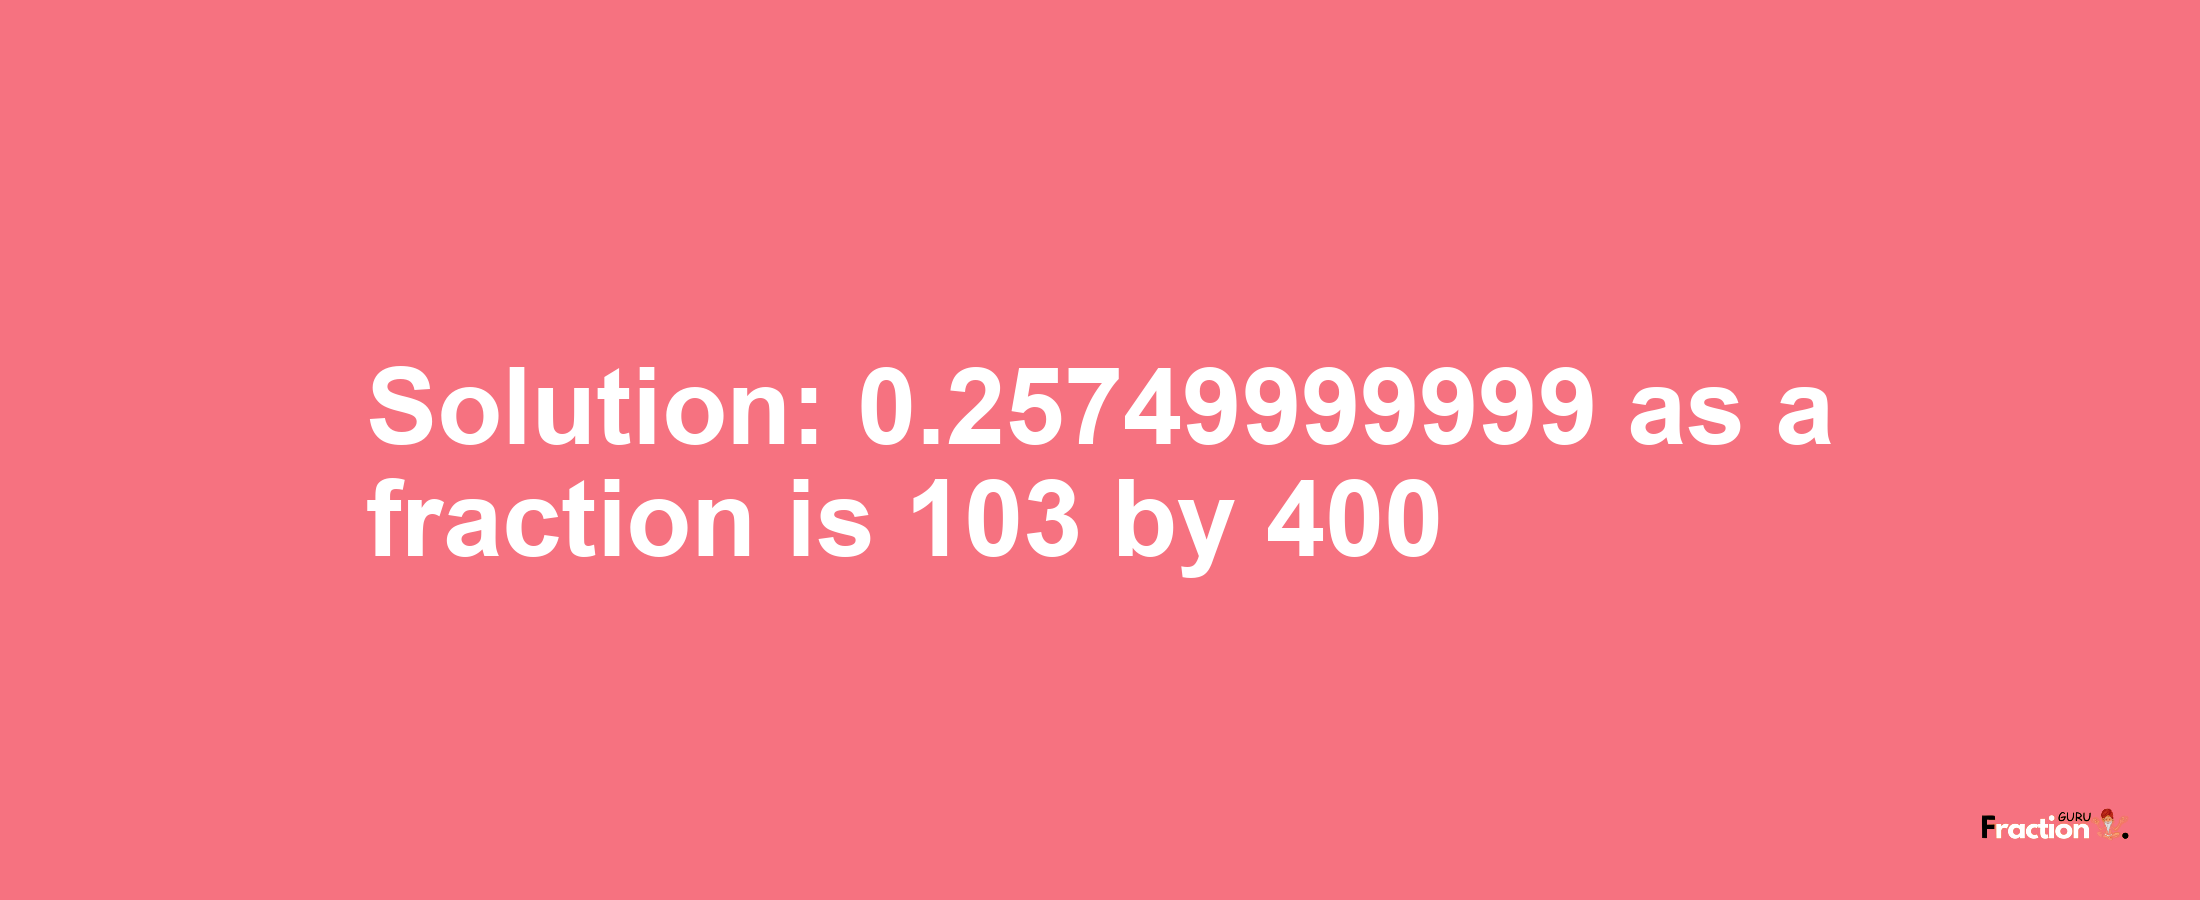 Solution:0.25749999999 as a fraction is 103/400